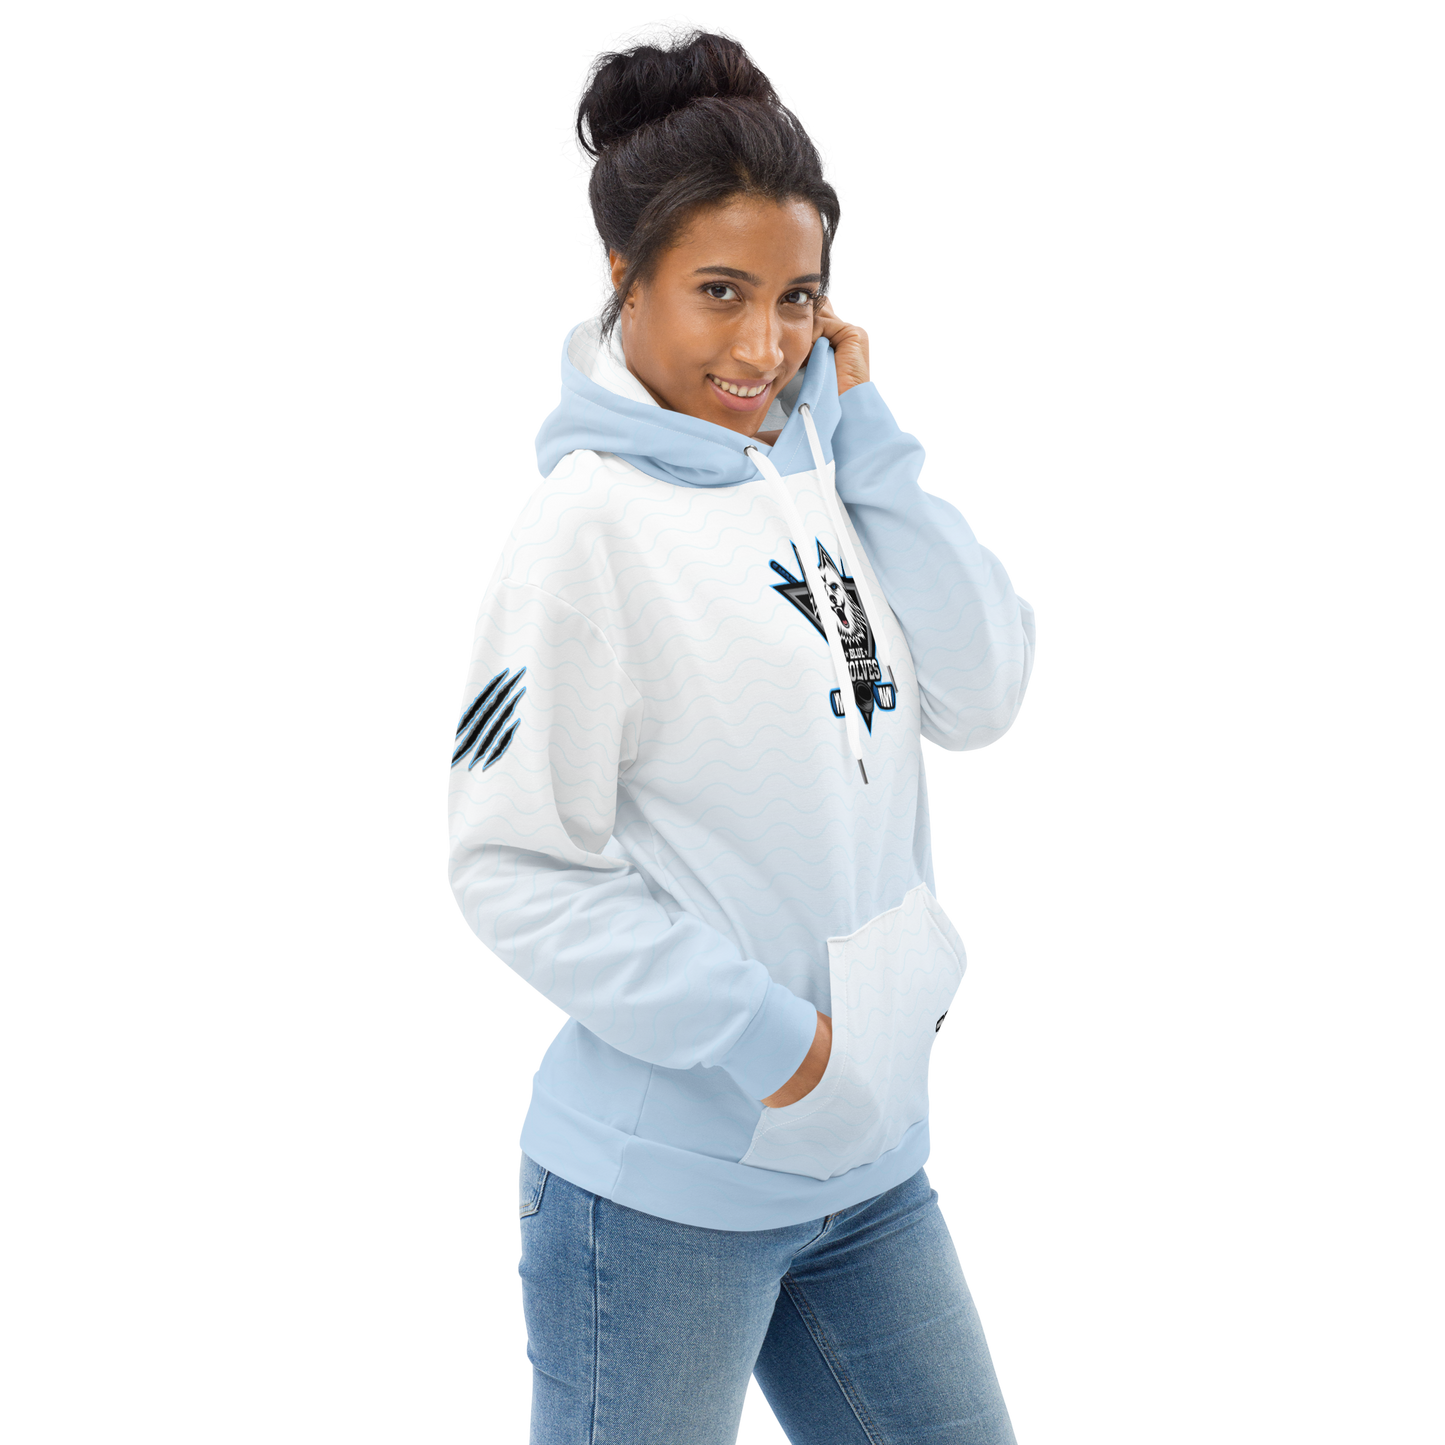 Blue Wolves Ice Hockey "Costagliola 33" personalized Unisex Hoodie